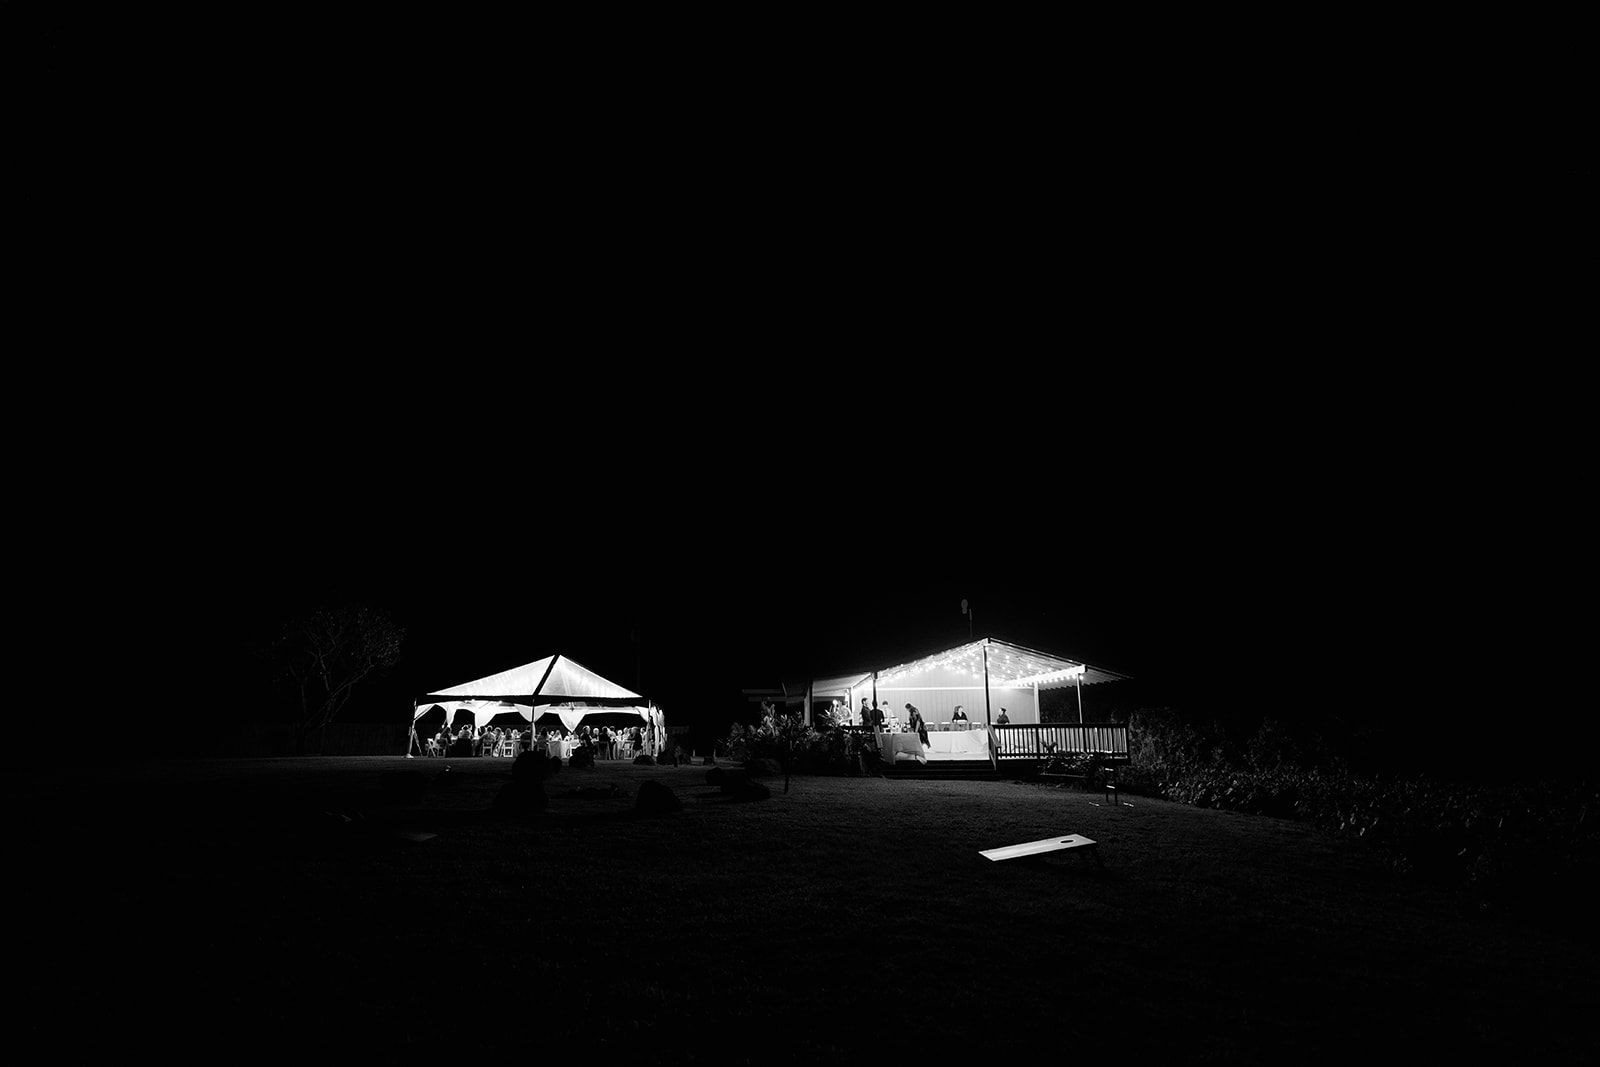 A black and white photo of a tent at night.